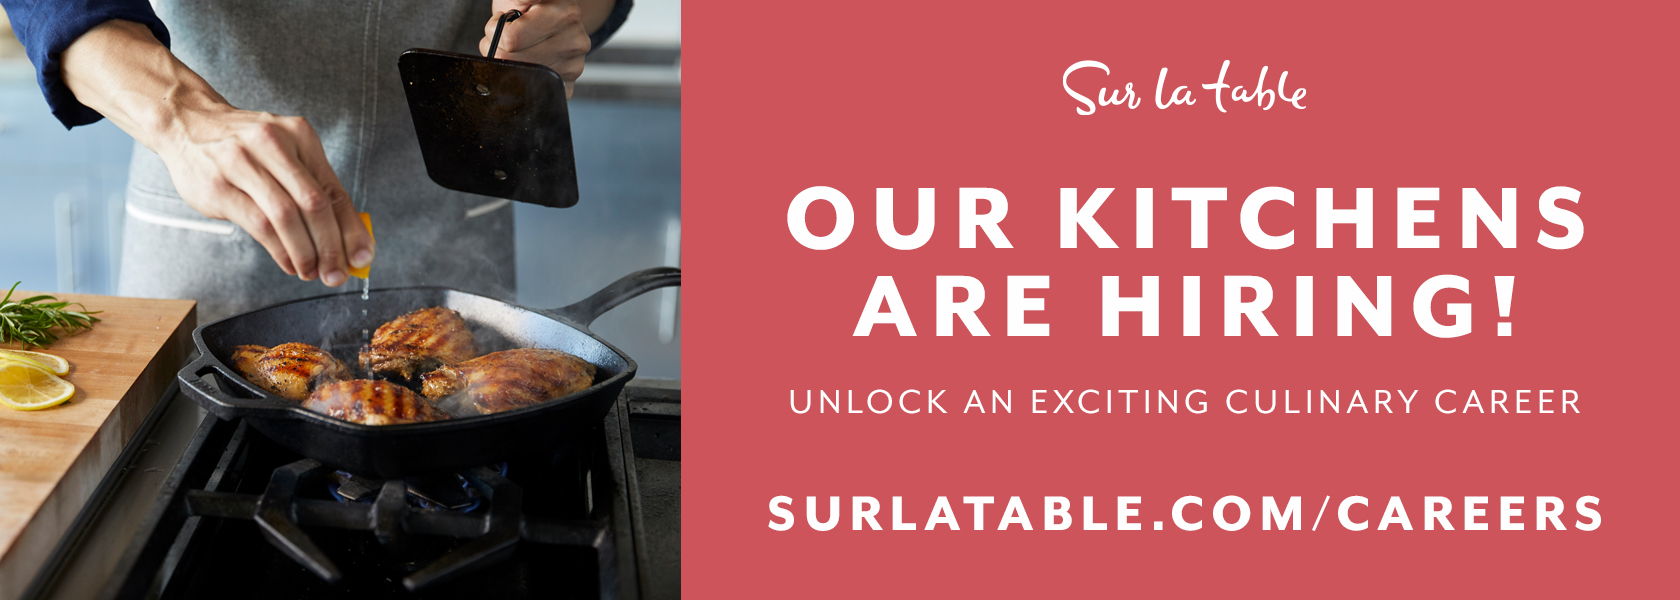 Sur La Table our kitchens are hiring! Unlock an exciting culinary career. See openings at surlatable.com/careers.